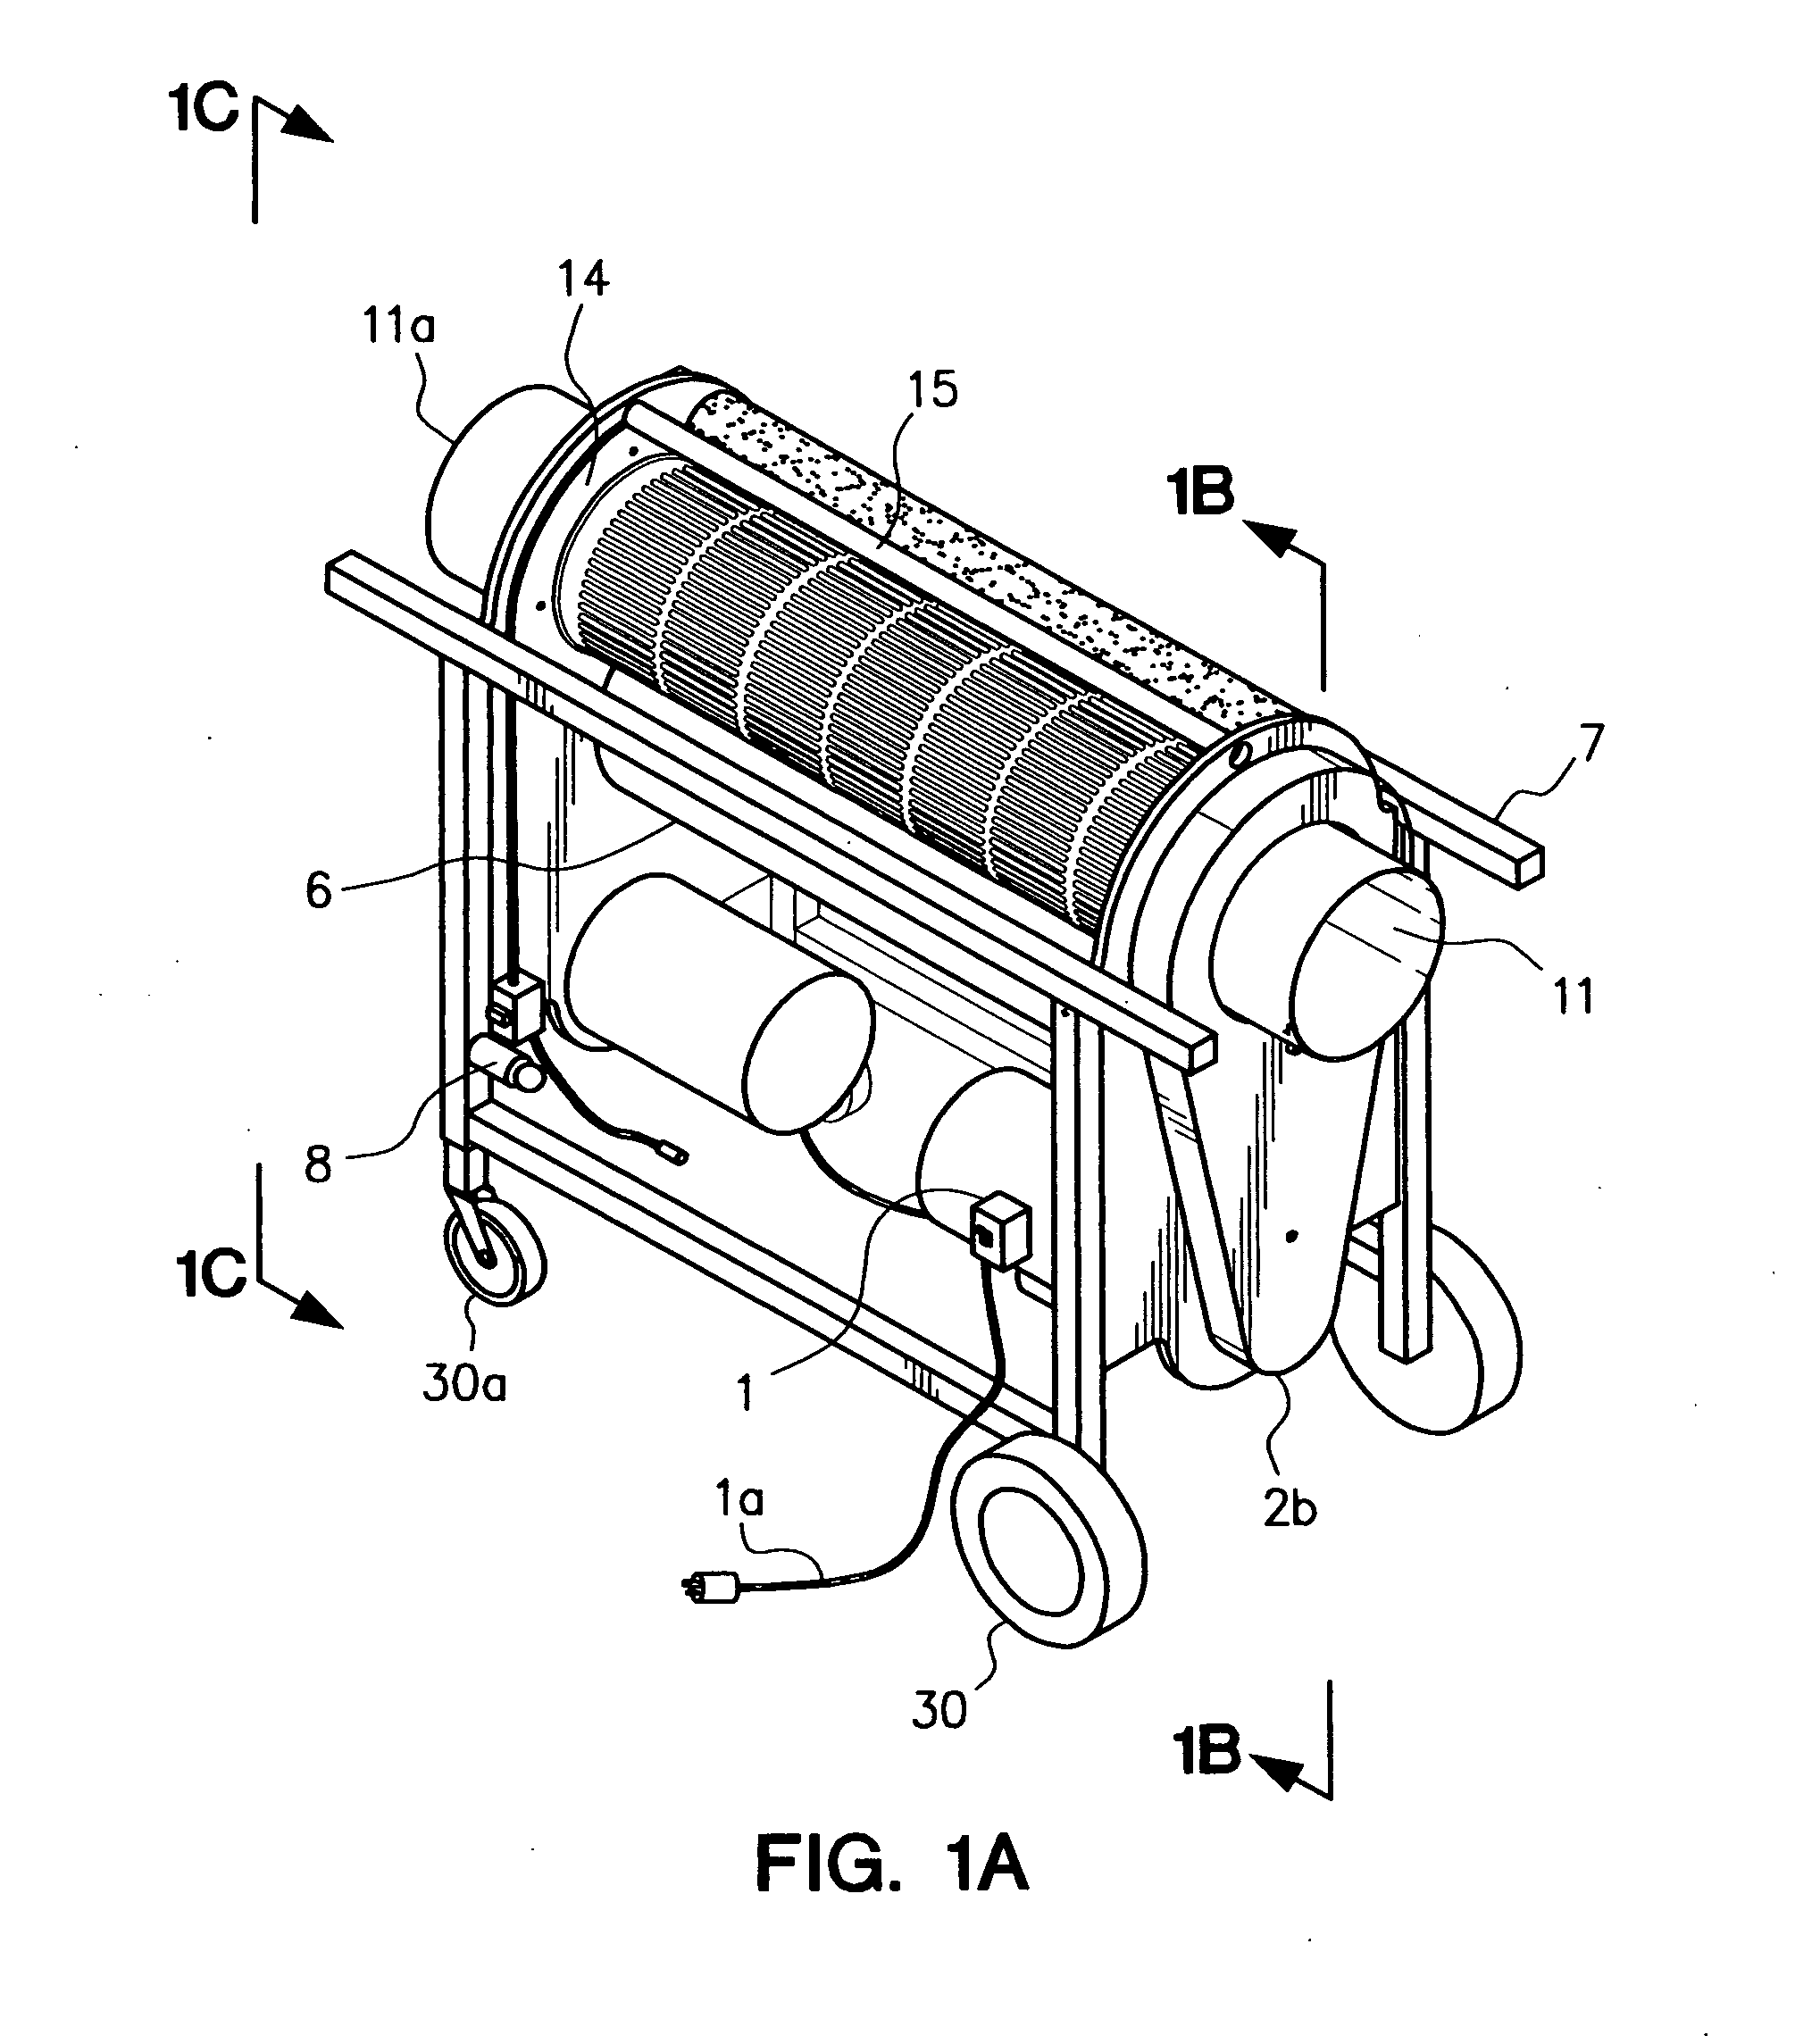 Method and apparatus for trimming buds and flowers